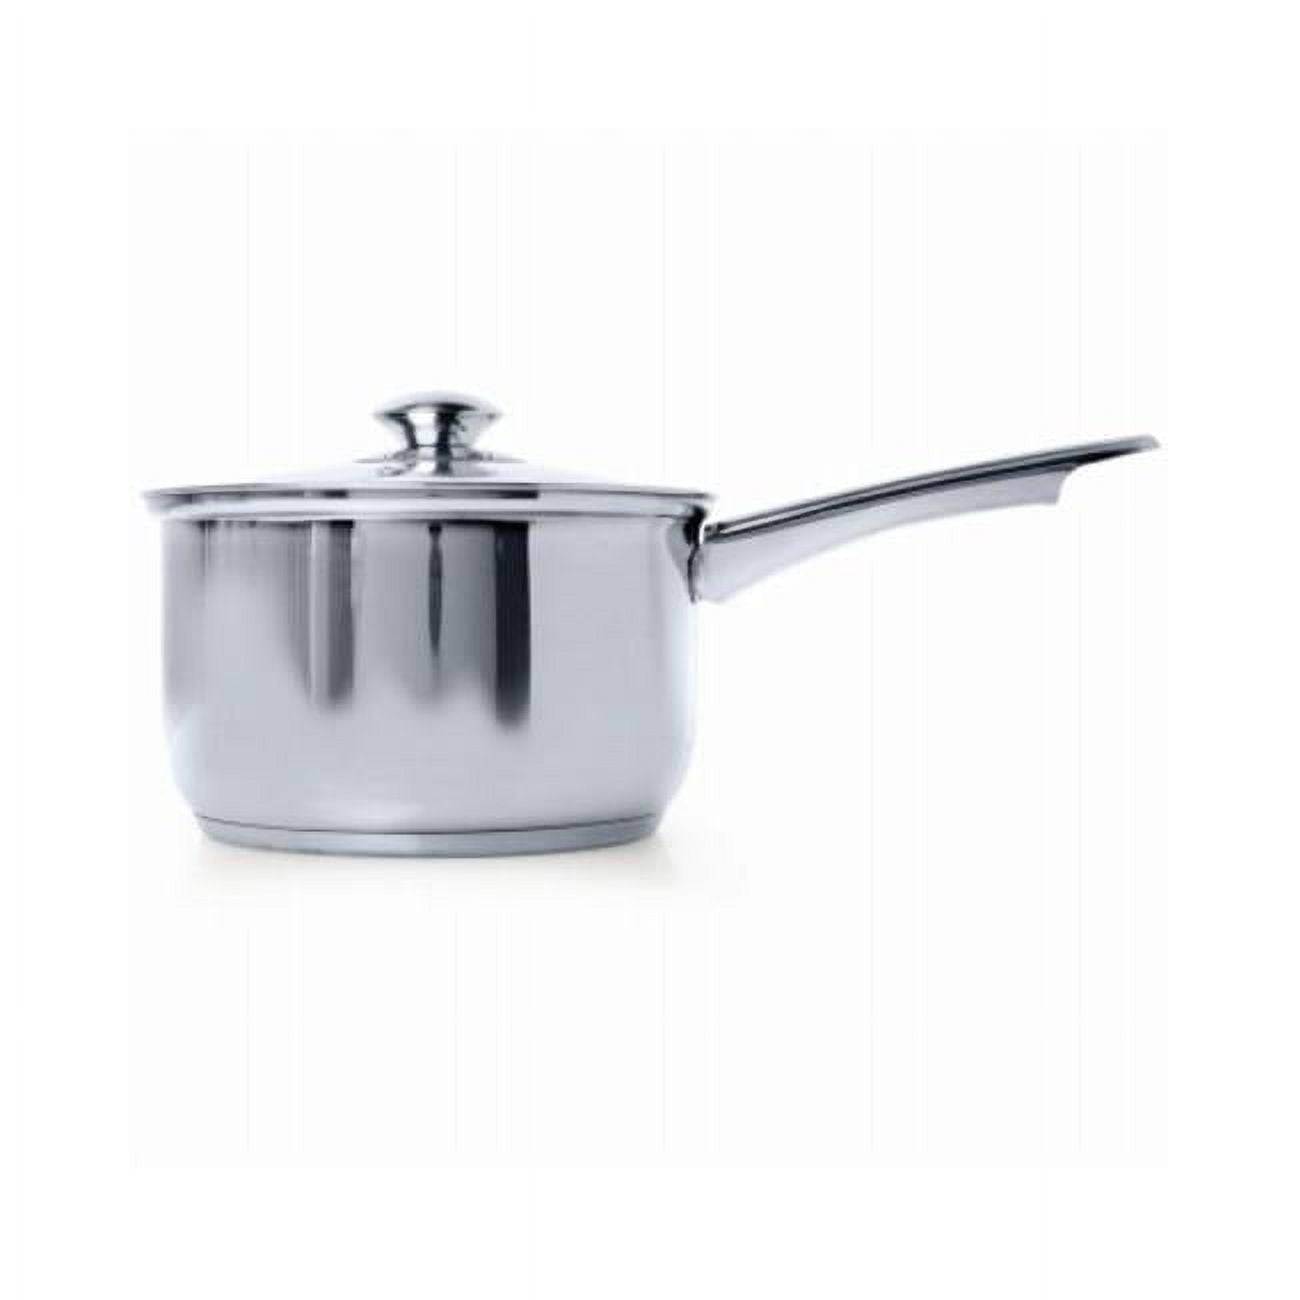 GUONING-L Large Cooking Pot with Lid,Stainless Steel Saucepans